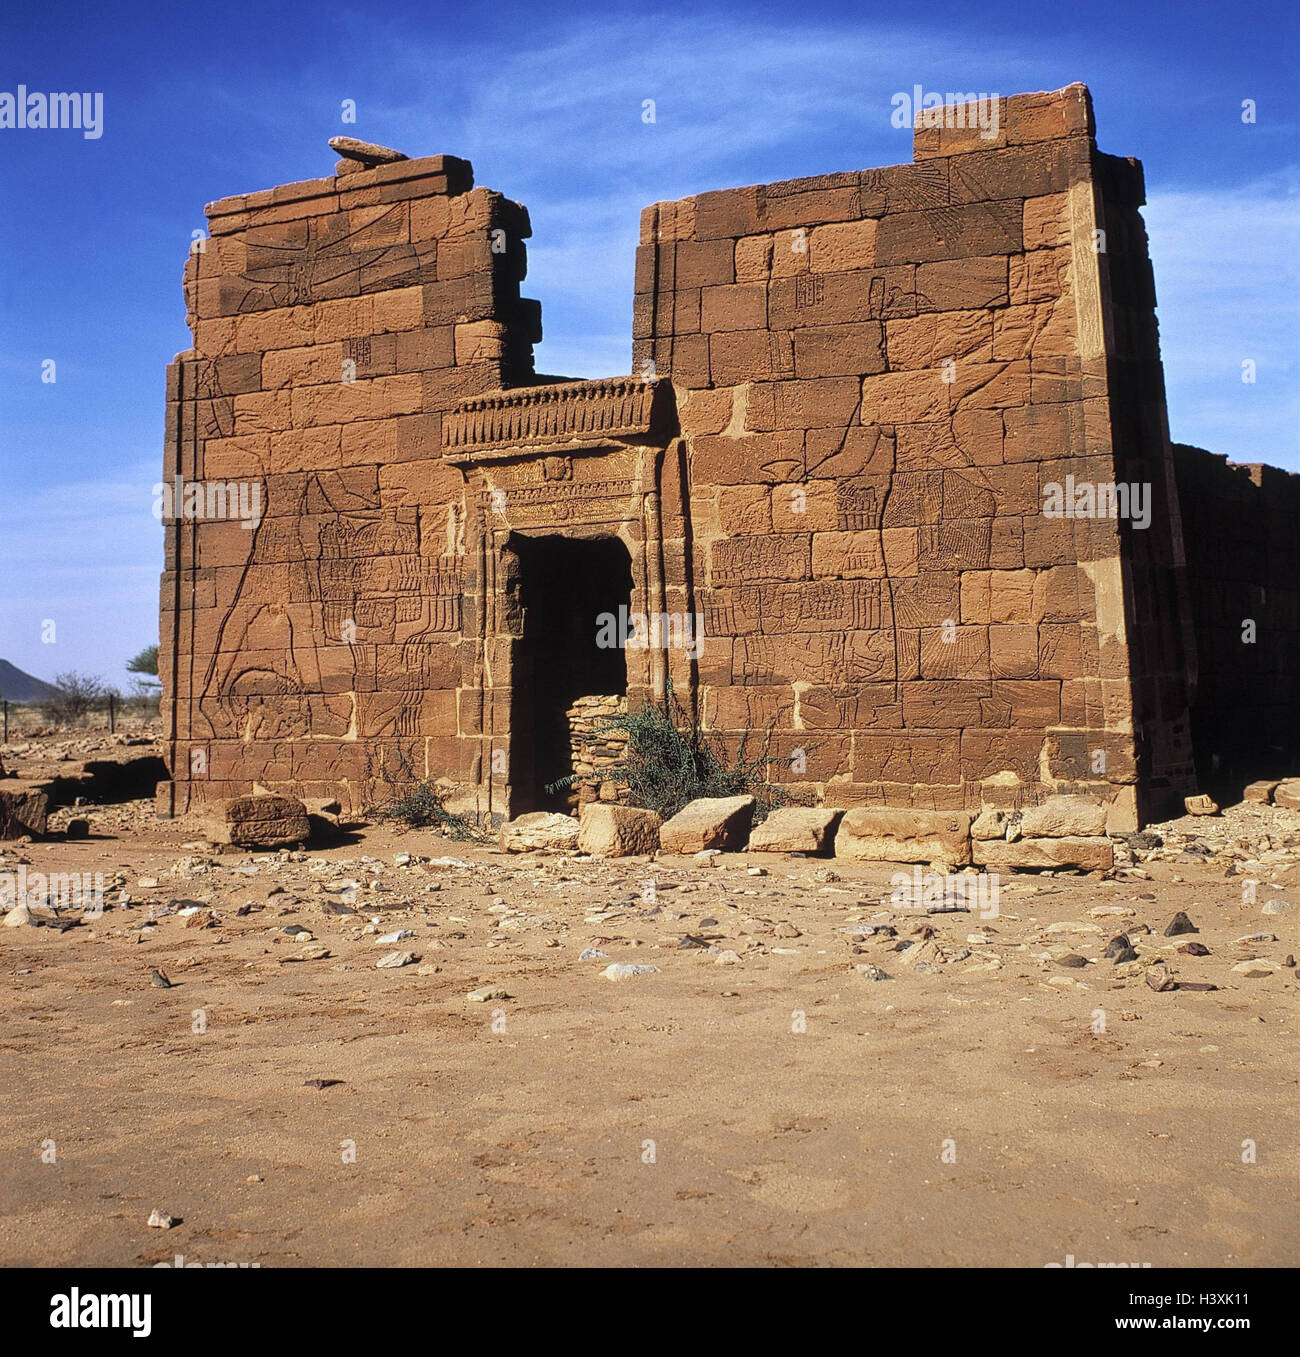 The Ancient City of Naqa - The Kushite Religious Stronghold